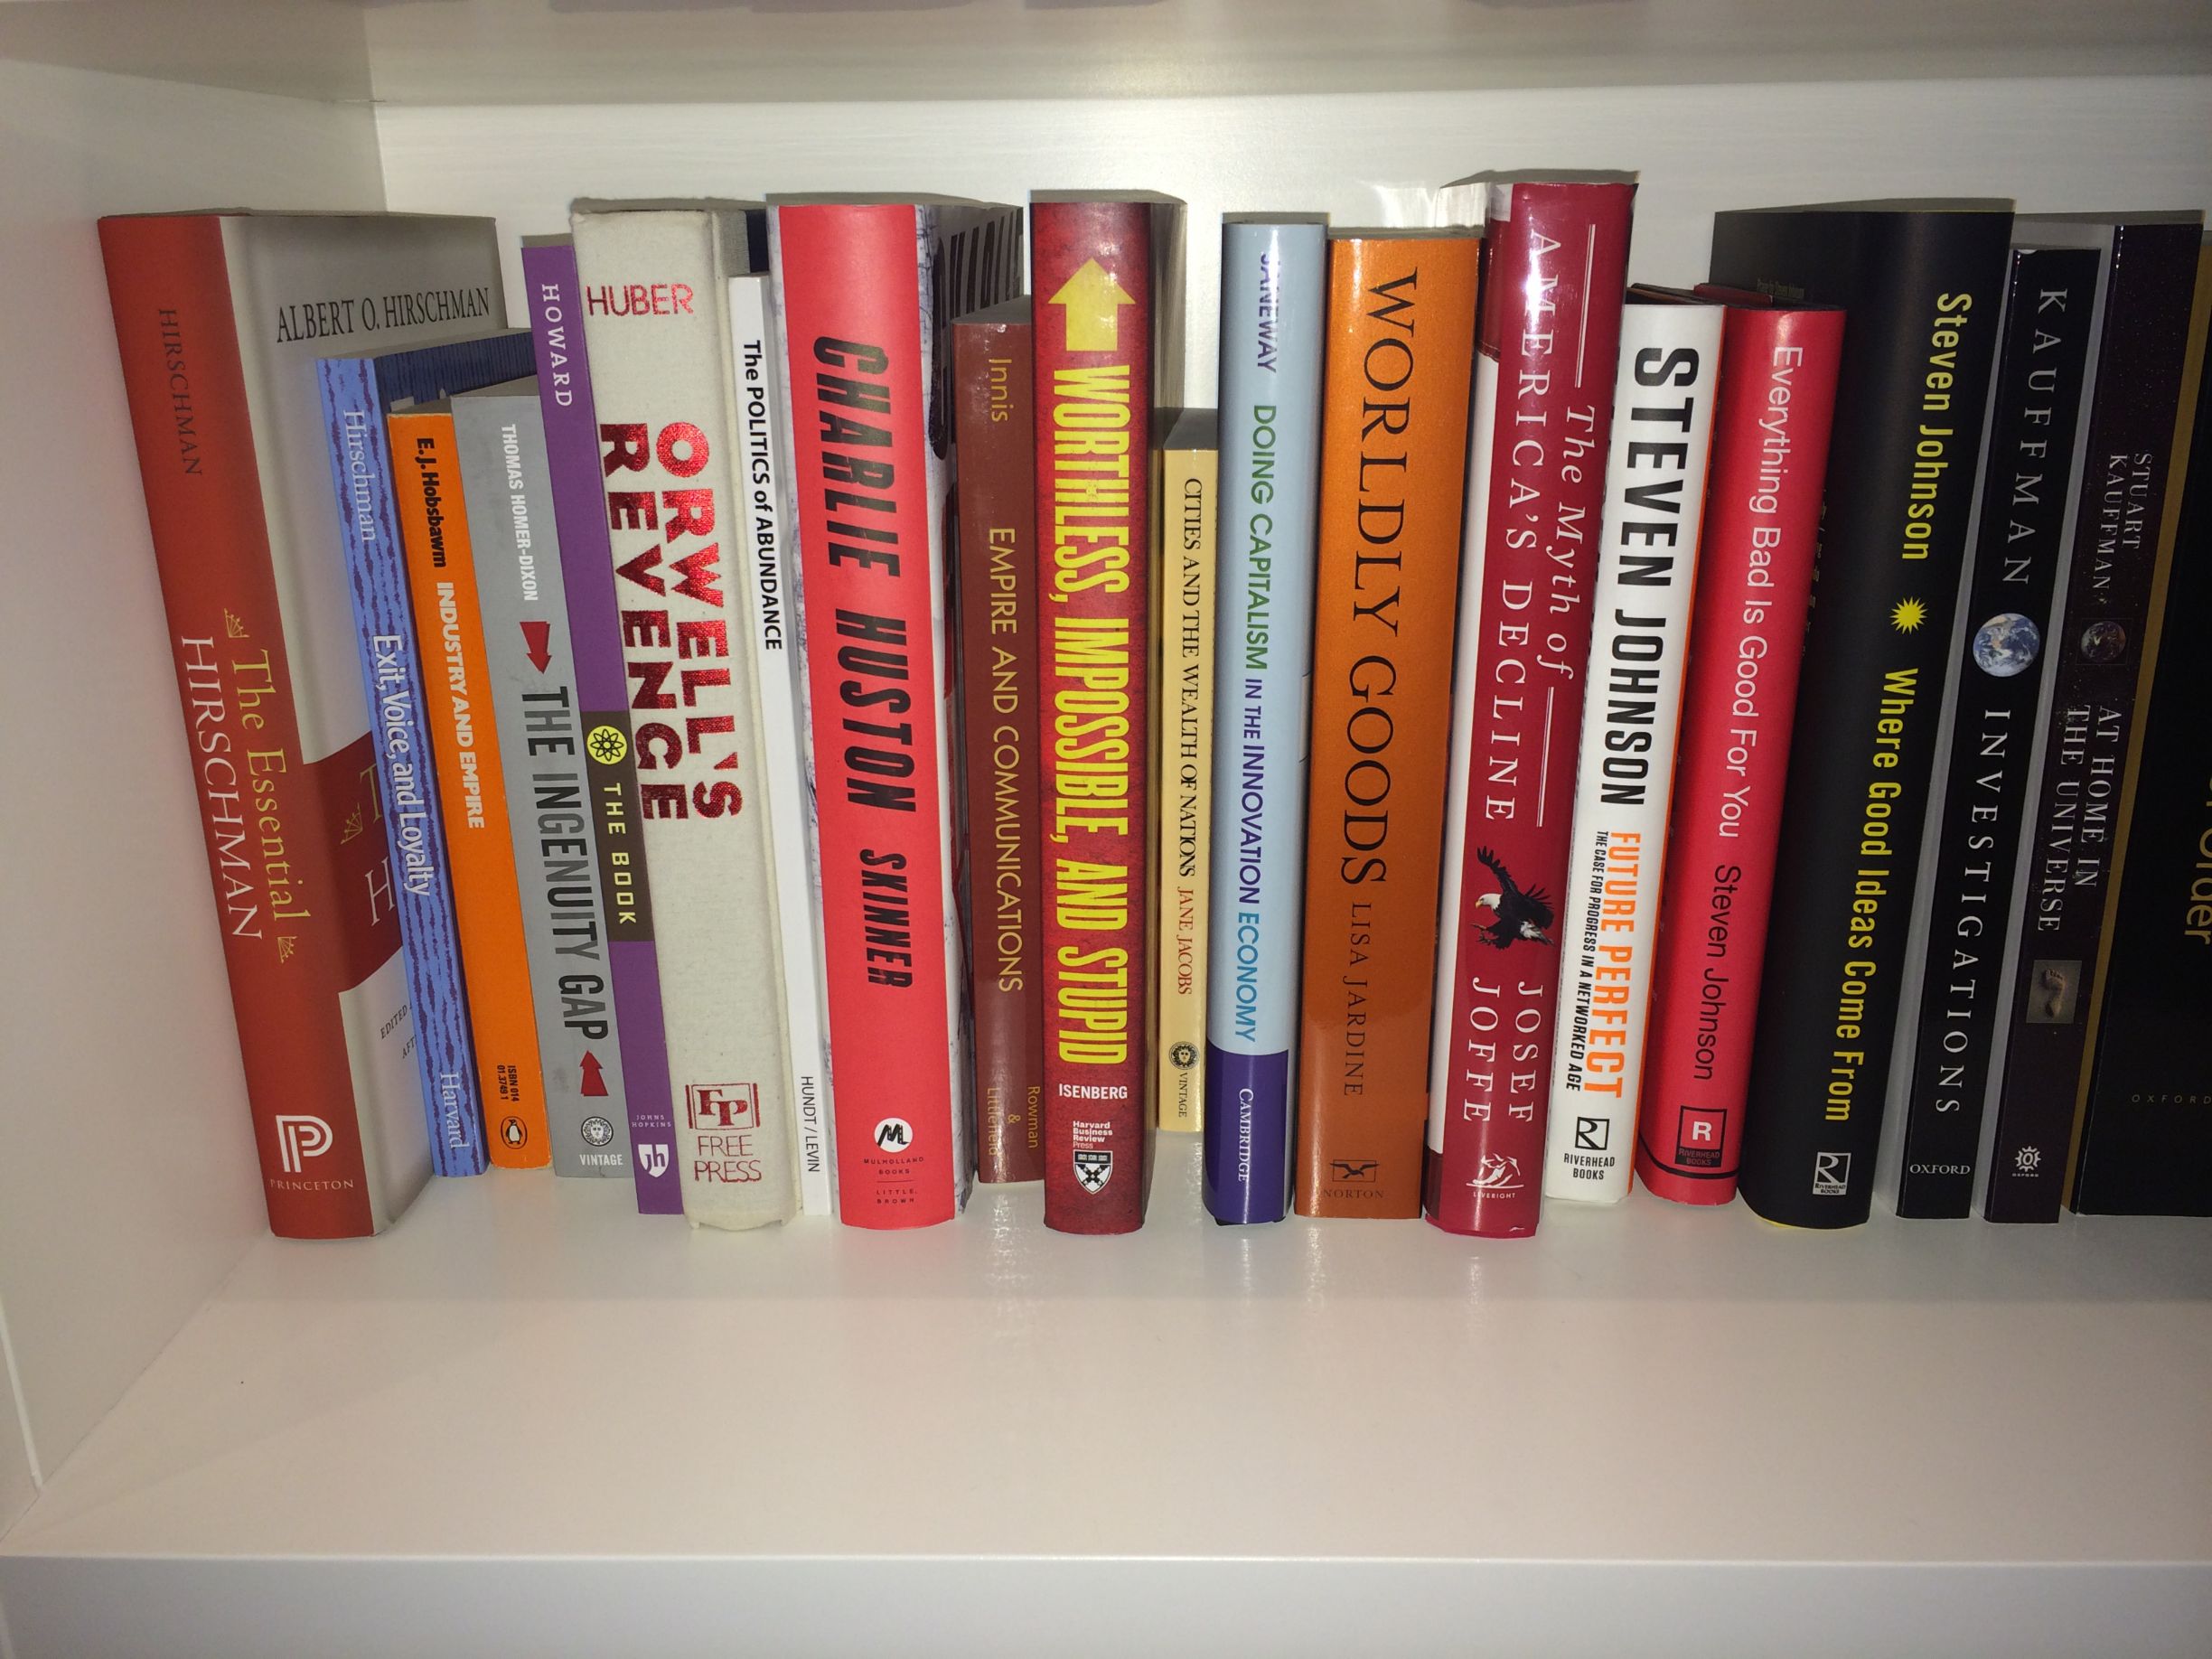 Some noted early adopters, such as investor Marc Andreessen, have uploaded pictures of their bookshelves. (Courtesy of Shelfie)